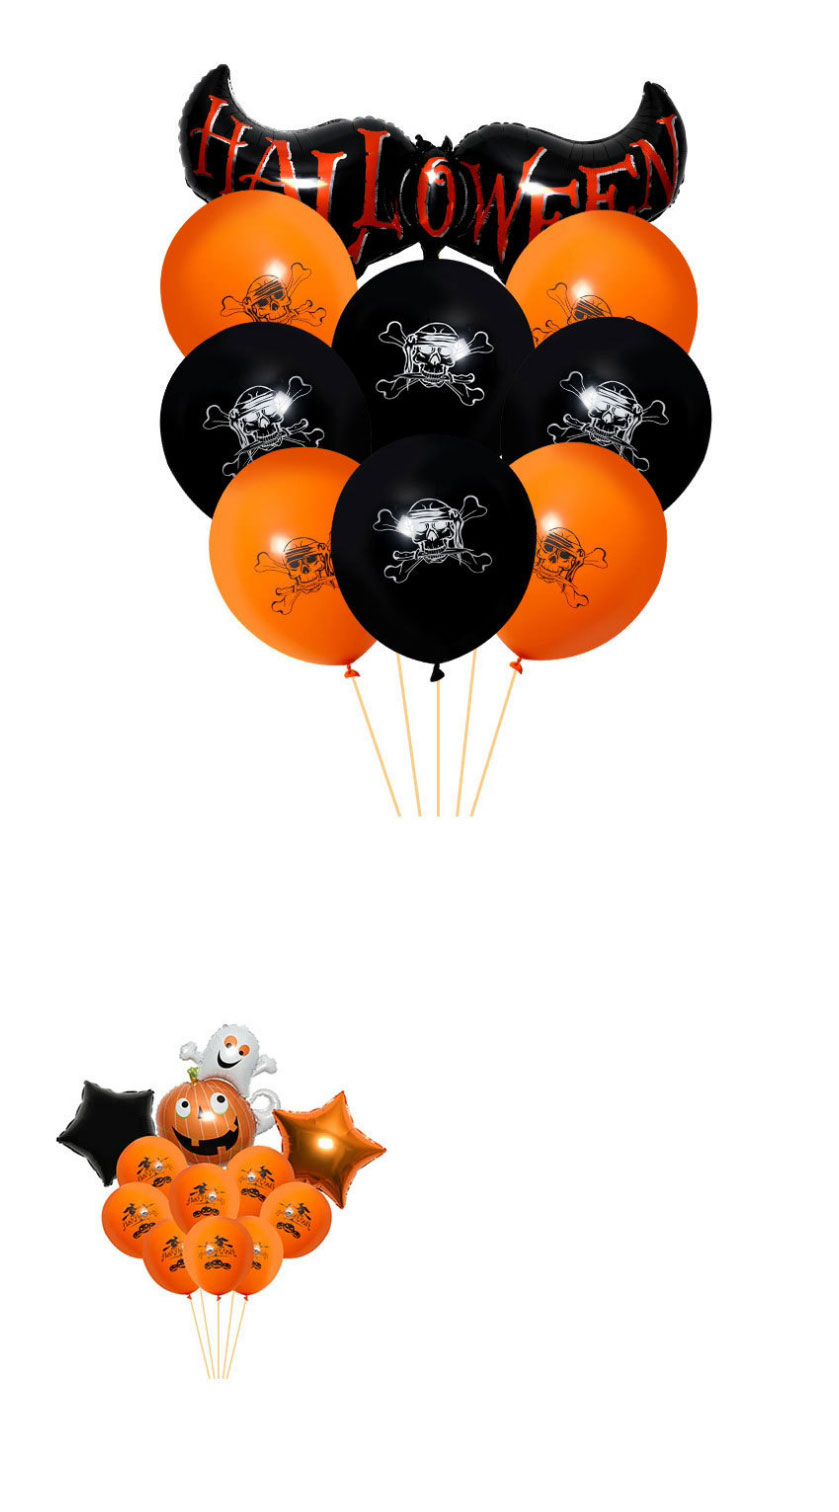 Fashion Balloon Combination 5 Halloween Printing Thickened Balloon Set,Festival & Party Supplies